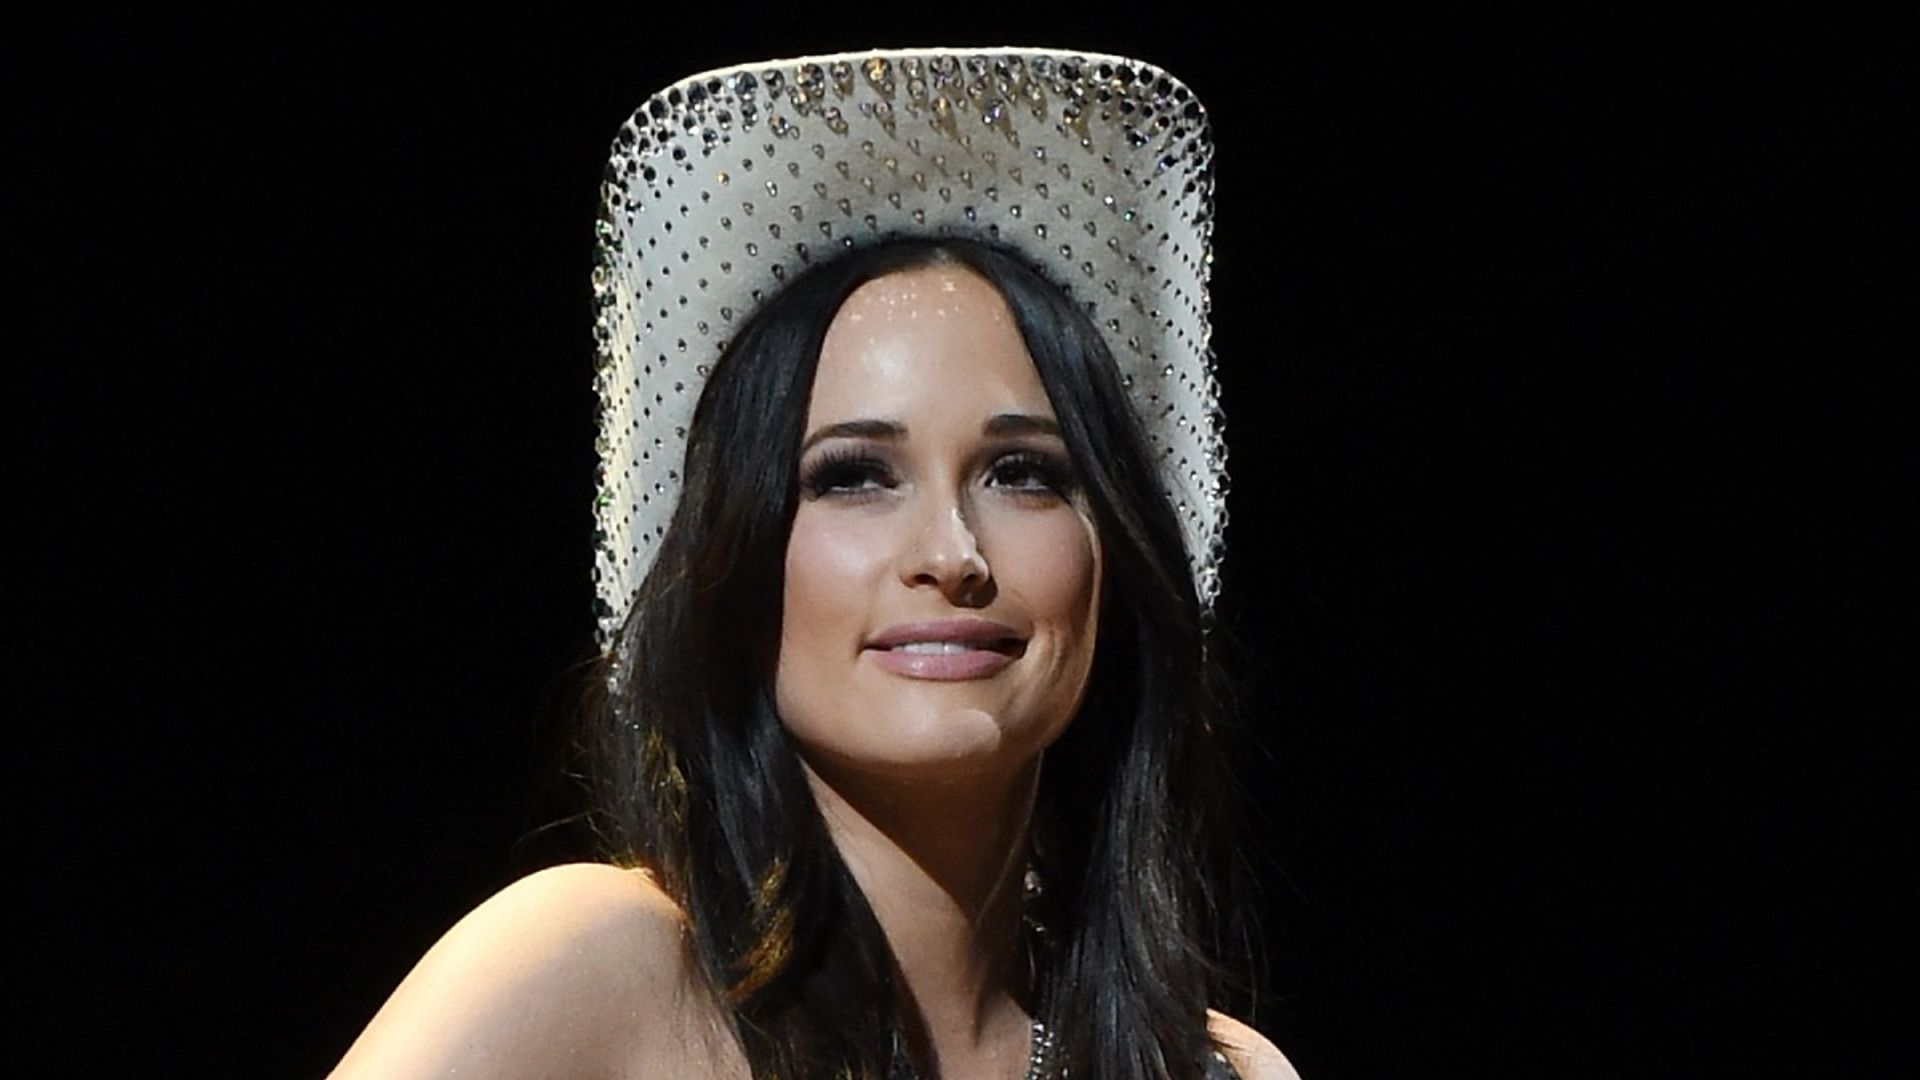 Kacey Musgraves shares heartbreaking admission with fans ahead of new album